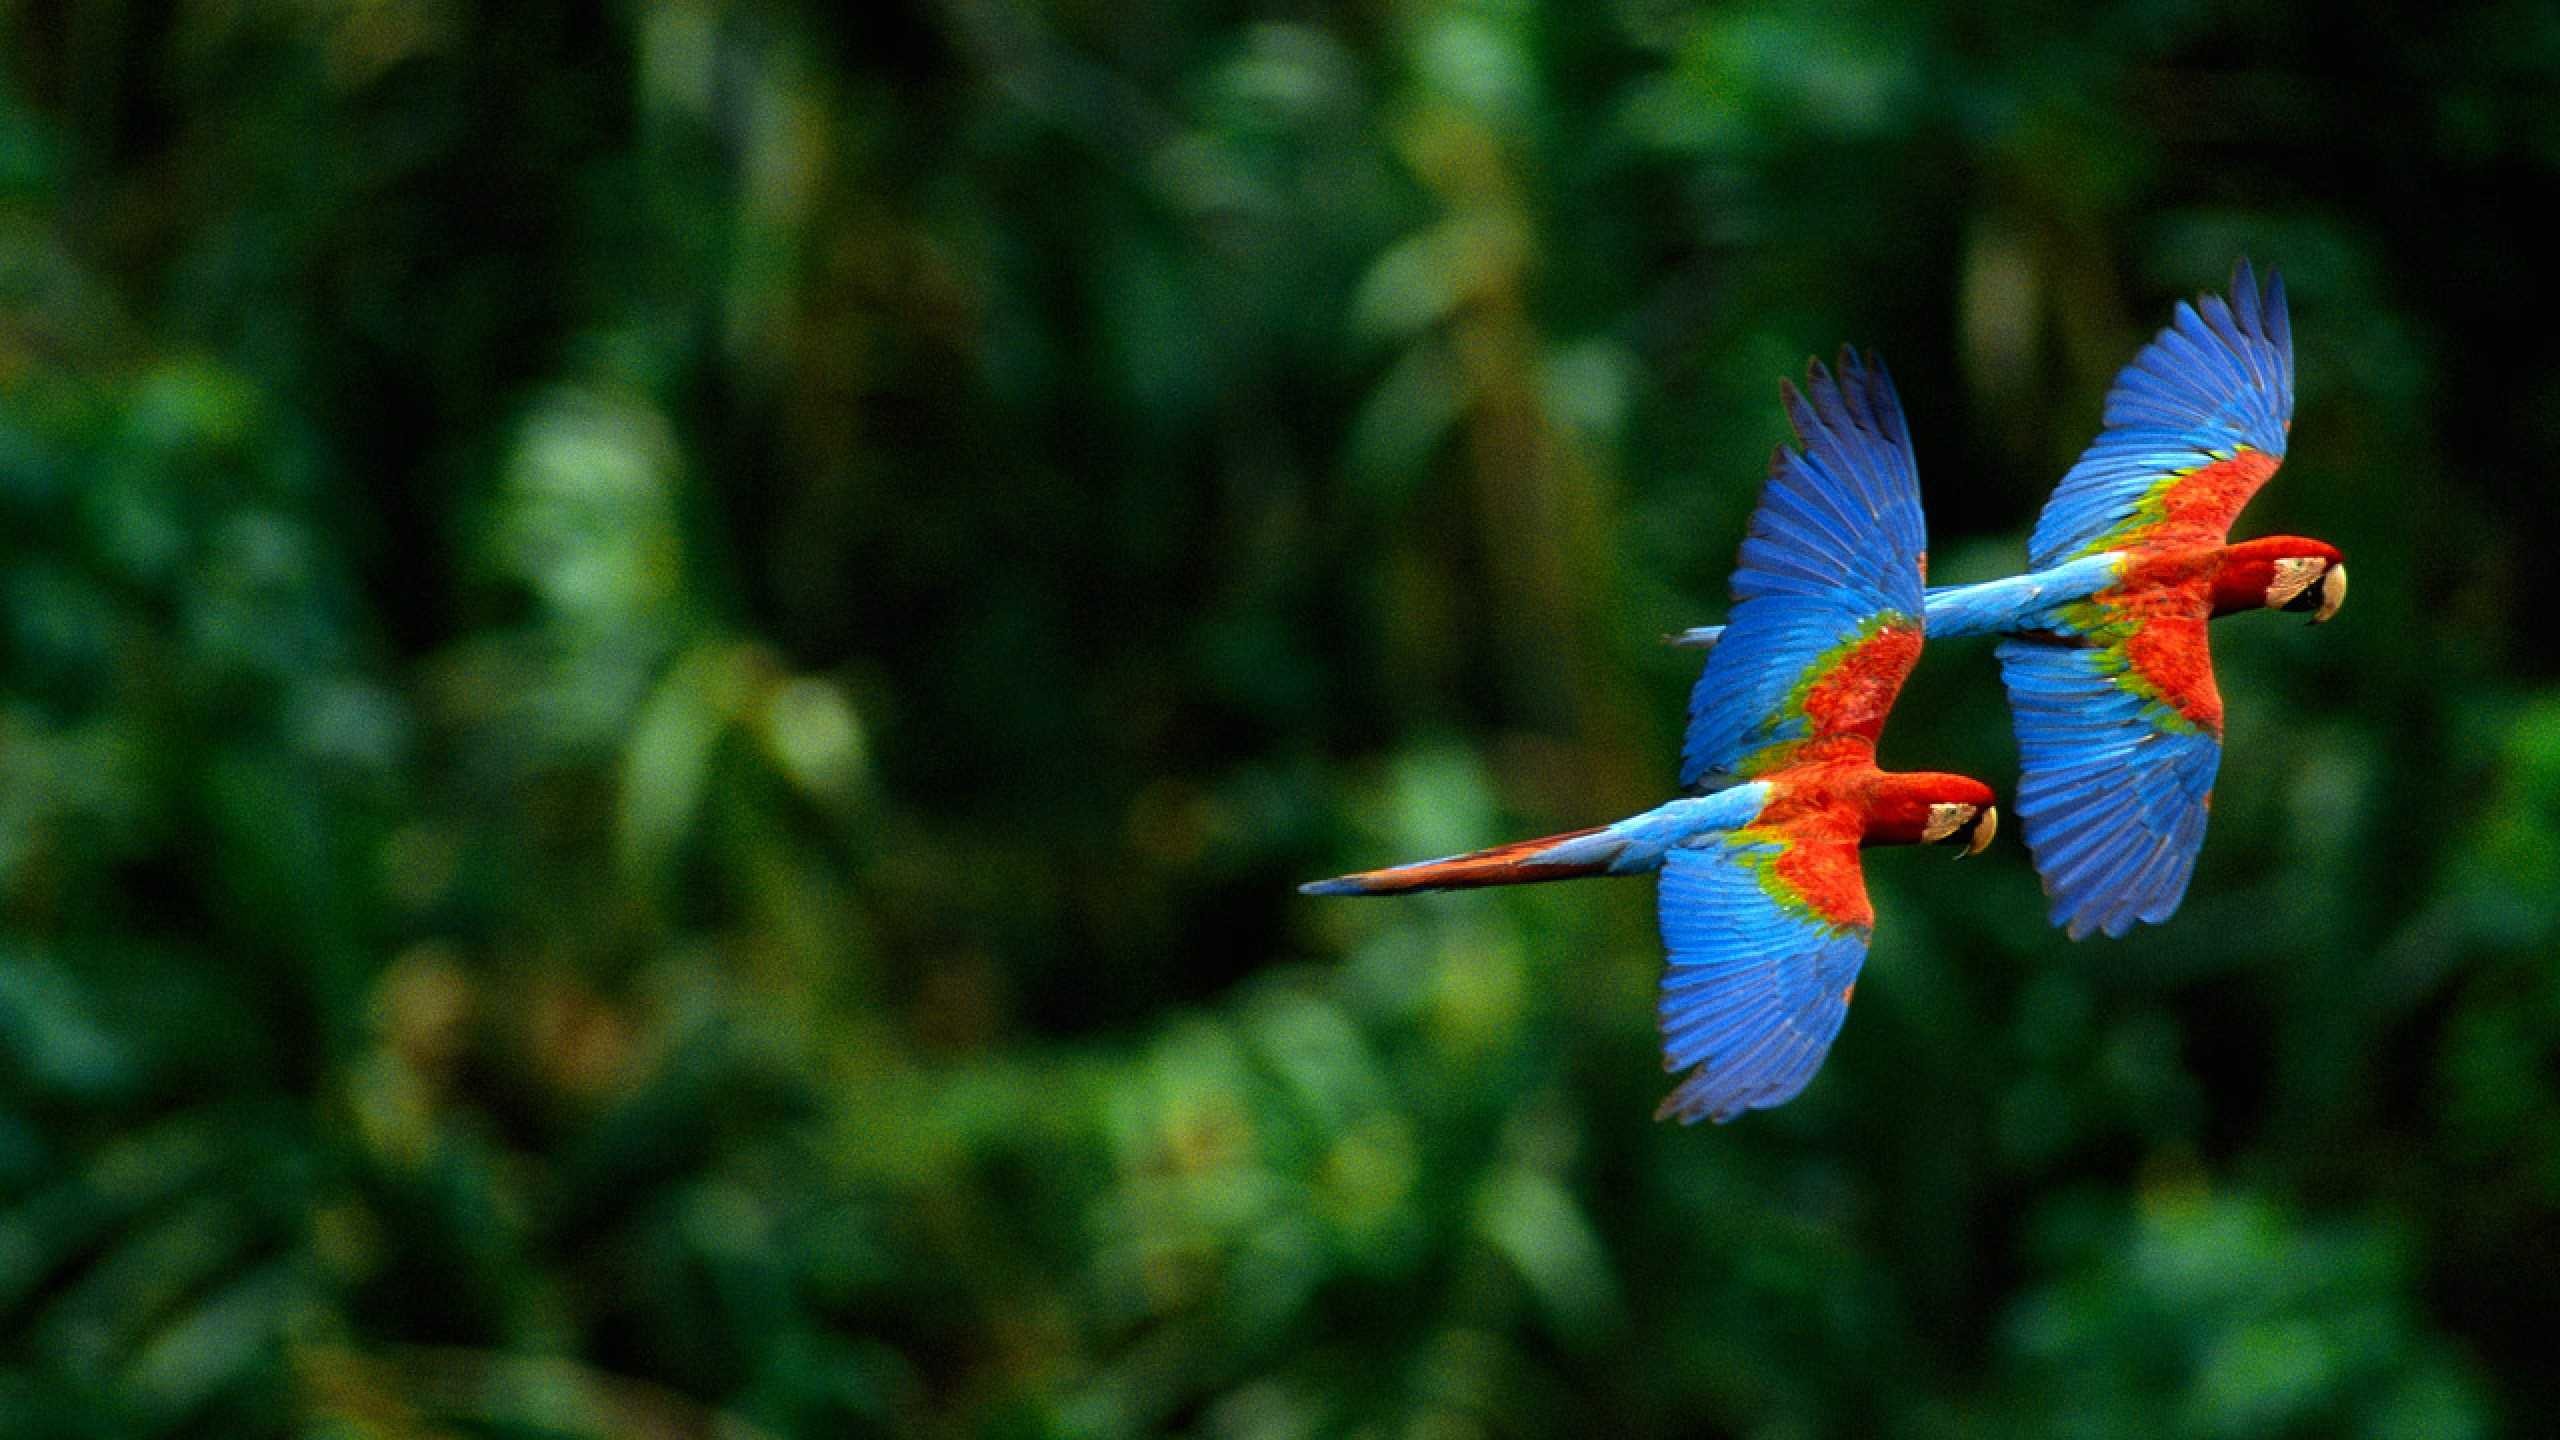 2560x1440 ... Cute Macaw Parrot Desktop HD Wallpapers | HD Wallapers for Free ...